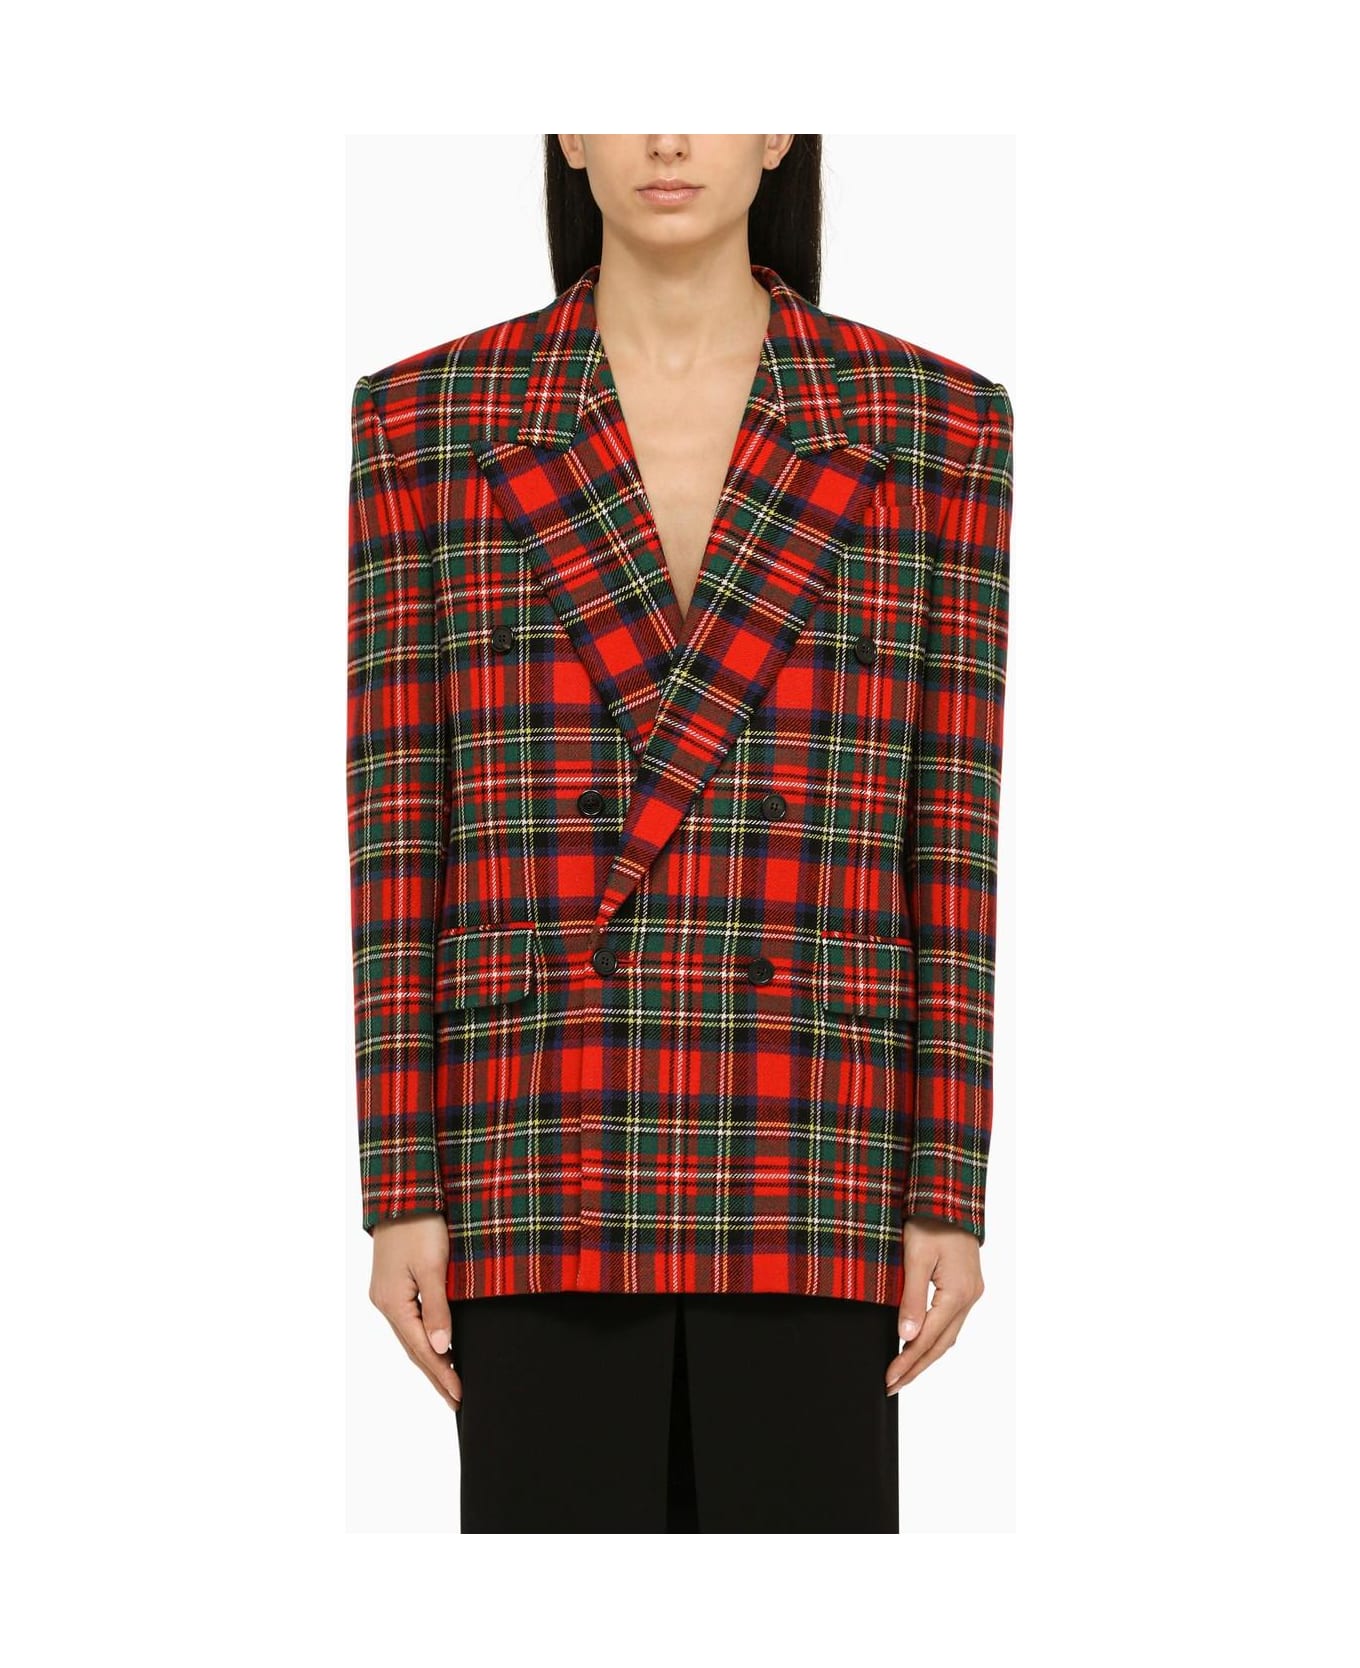 Saint Laurent Red Tartan Double-breasted Wool Jacket ブレザー